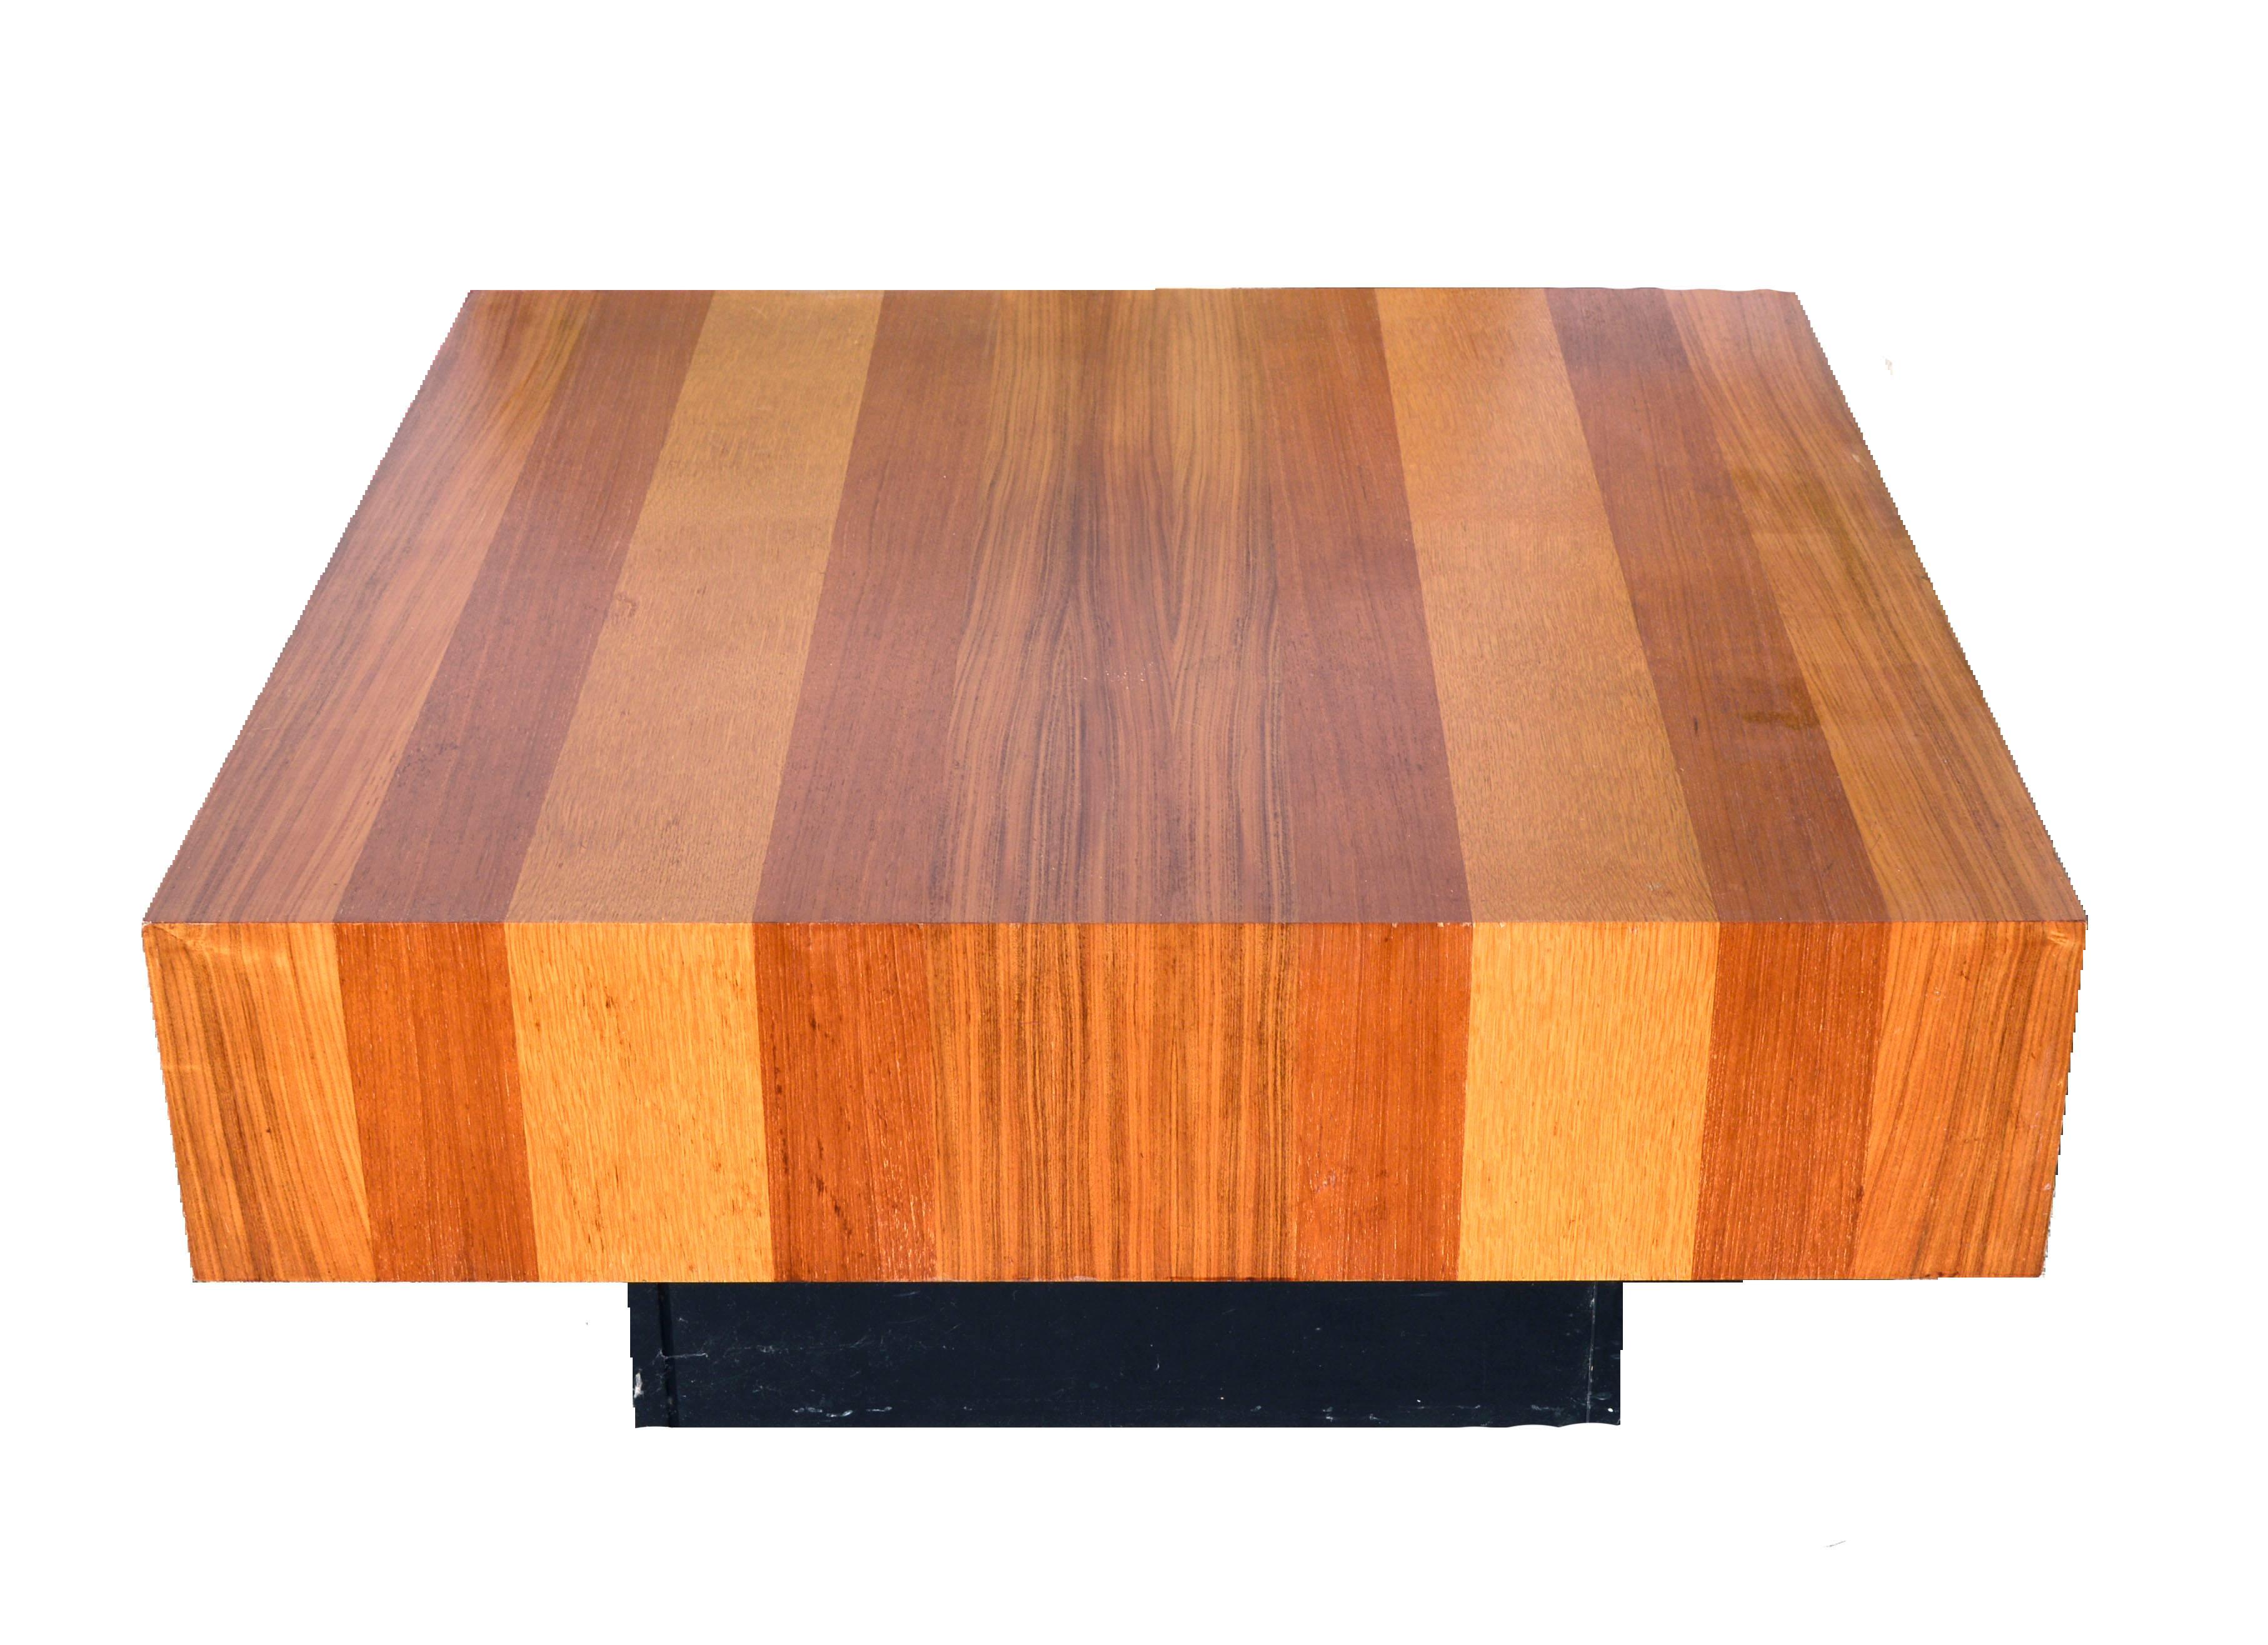 Drylund of Denmark parquetry wood coffee table. Exotic wood veneers in teak and curly maple over composition wood on a black lacquered wood base. Founded in 1960, Dyrlund has been manufacturing high quality furniture for many years. Standard parcel